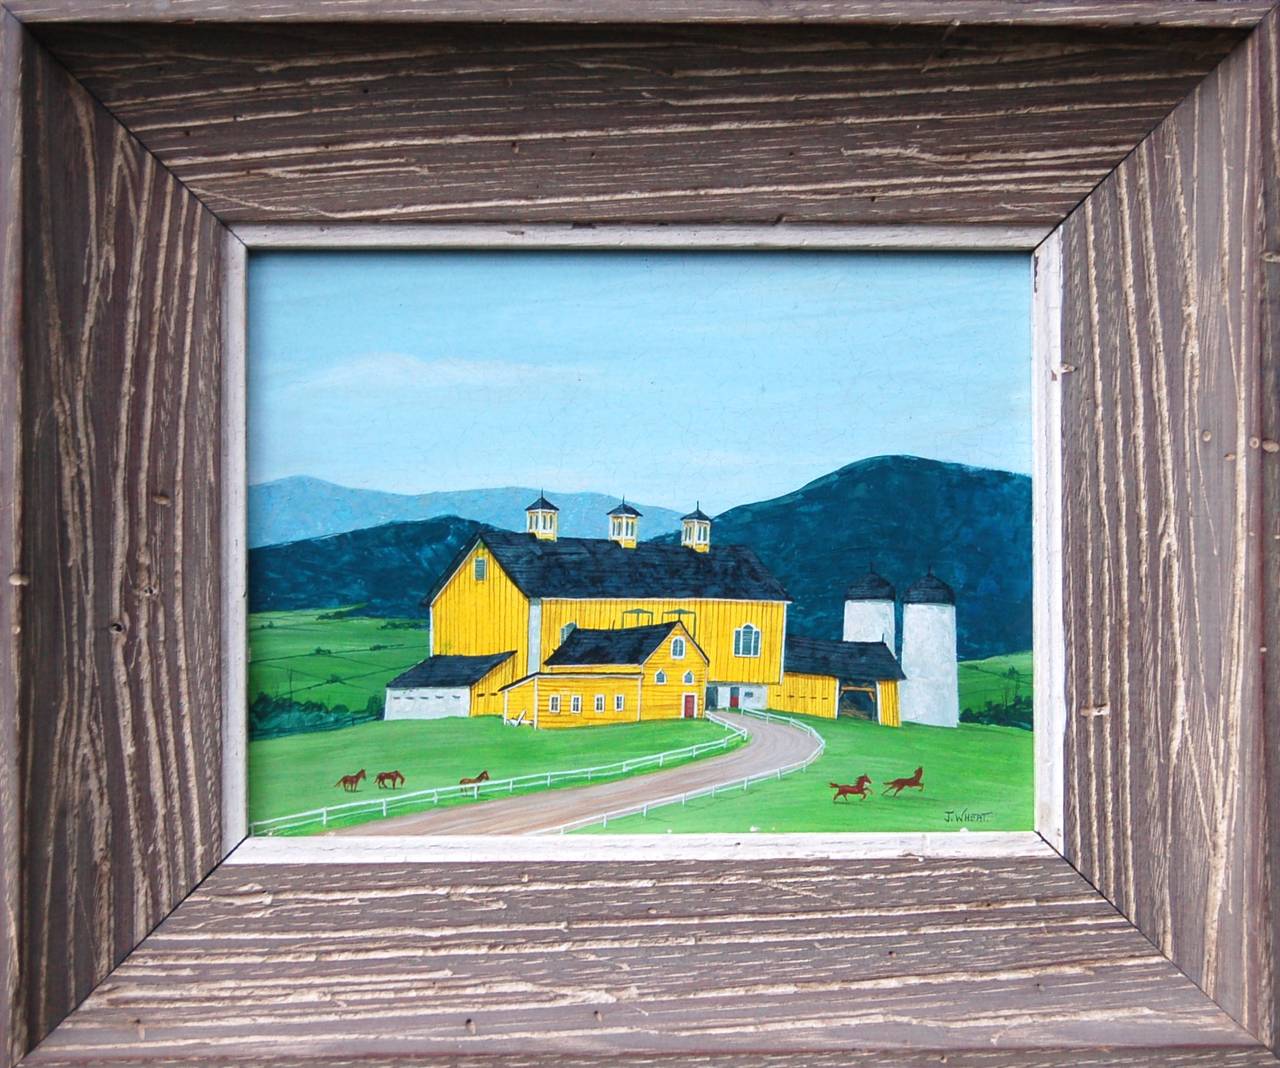 The Yellow Barn - Painting by John Potter Wheat